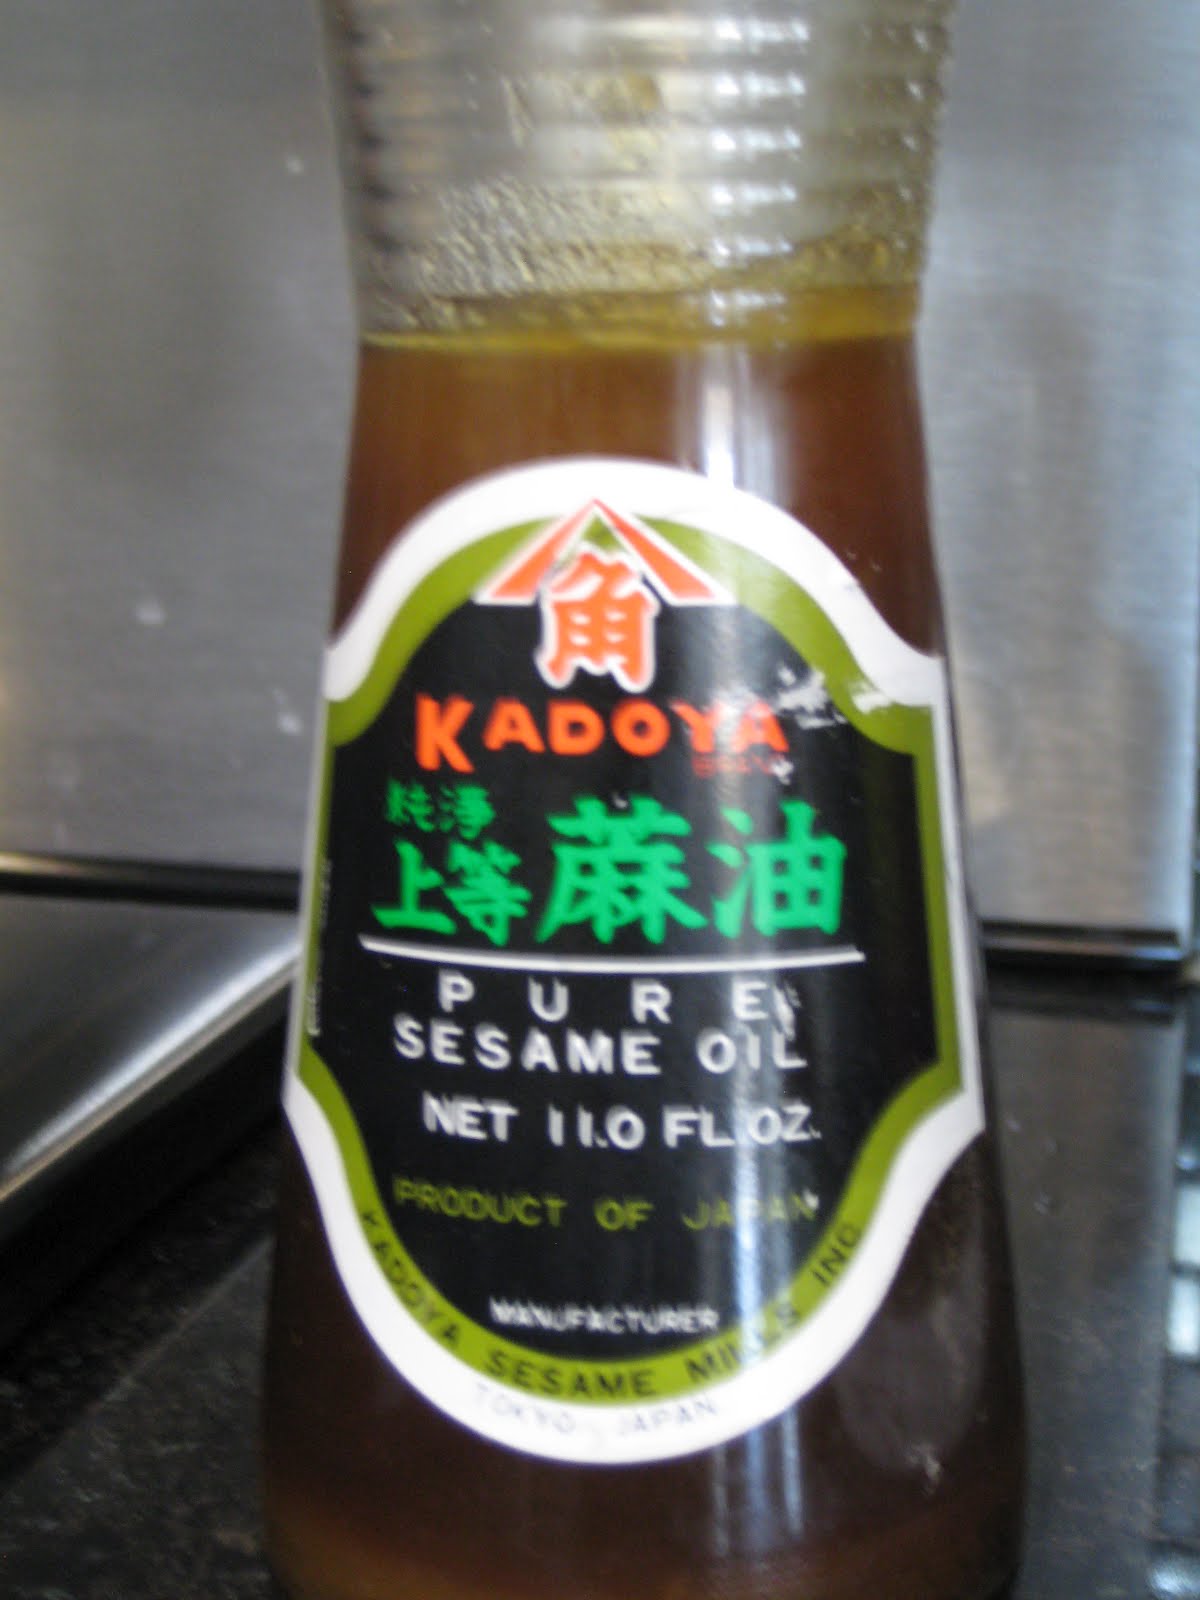 Micah brews. Calily cooks.: My Top 5 Essential Asian Condiments